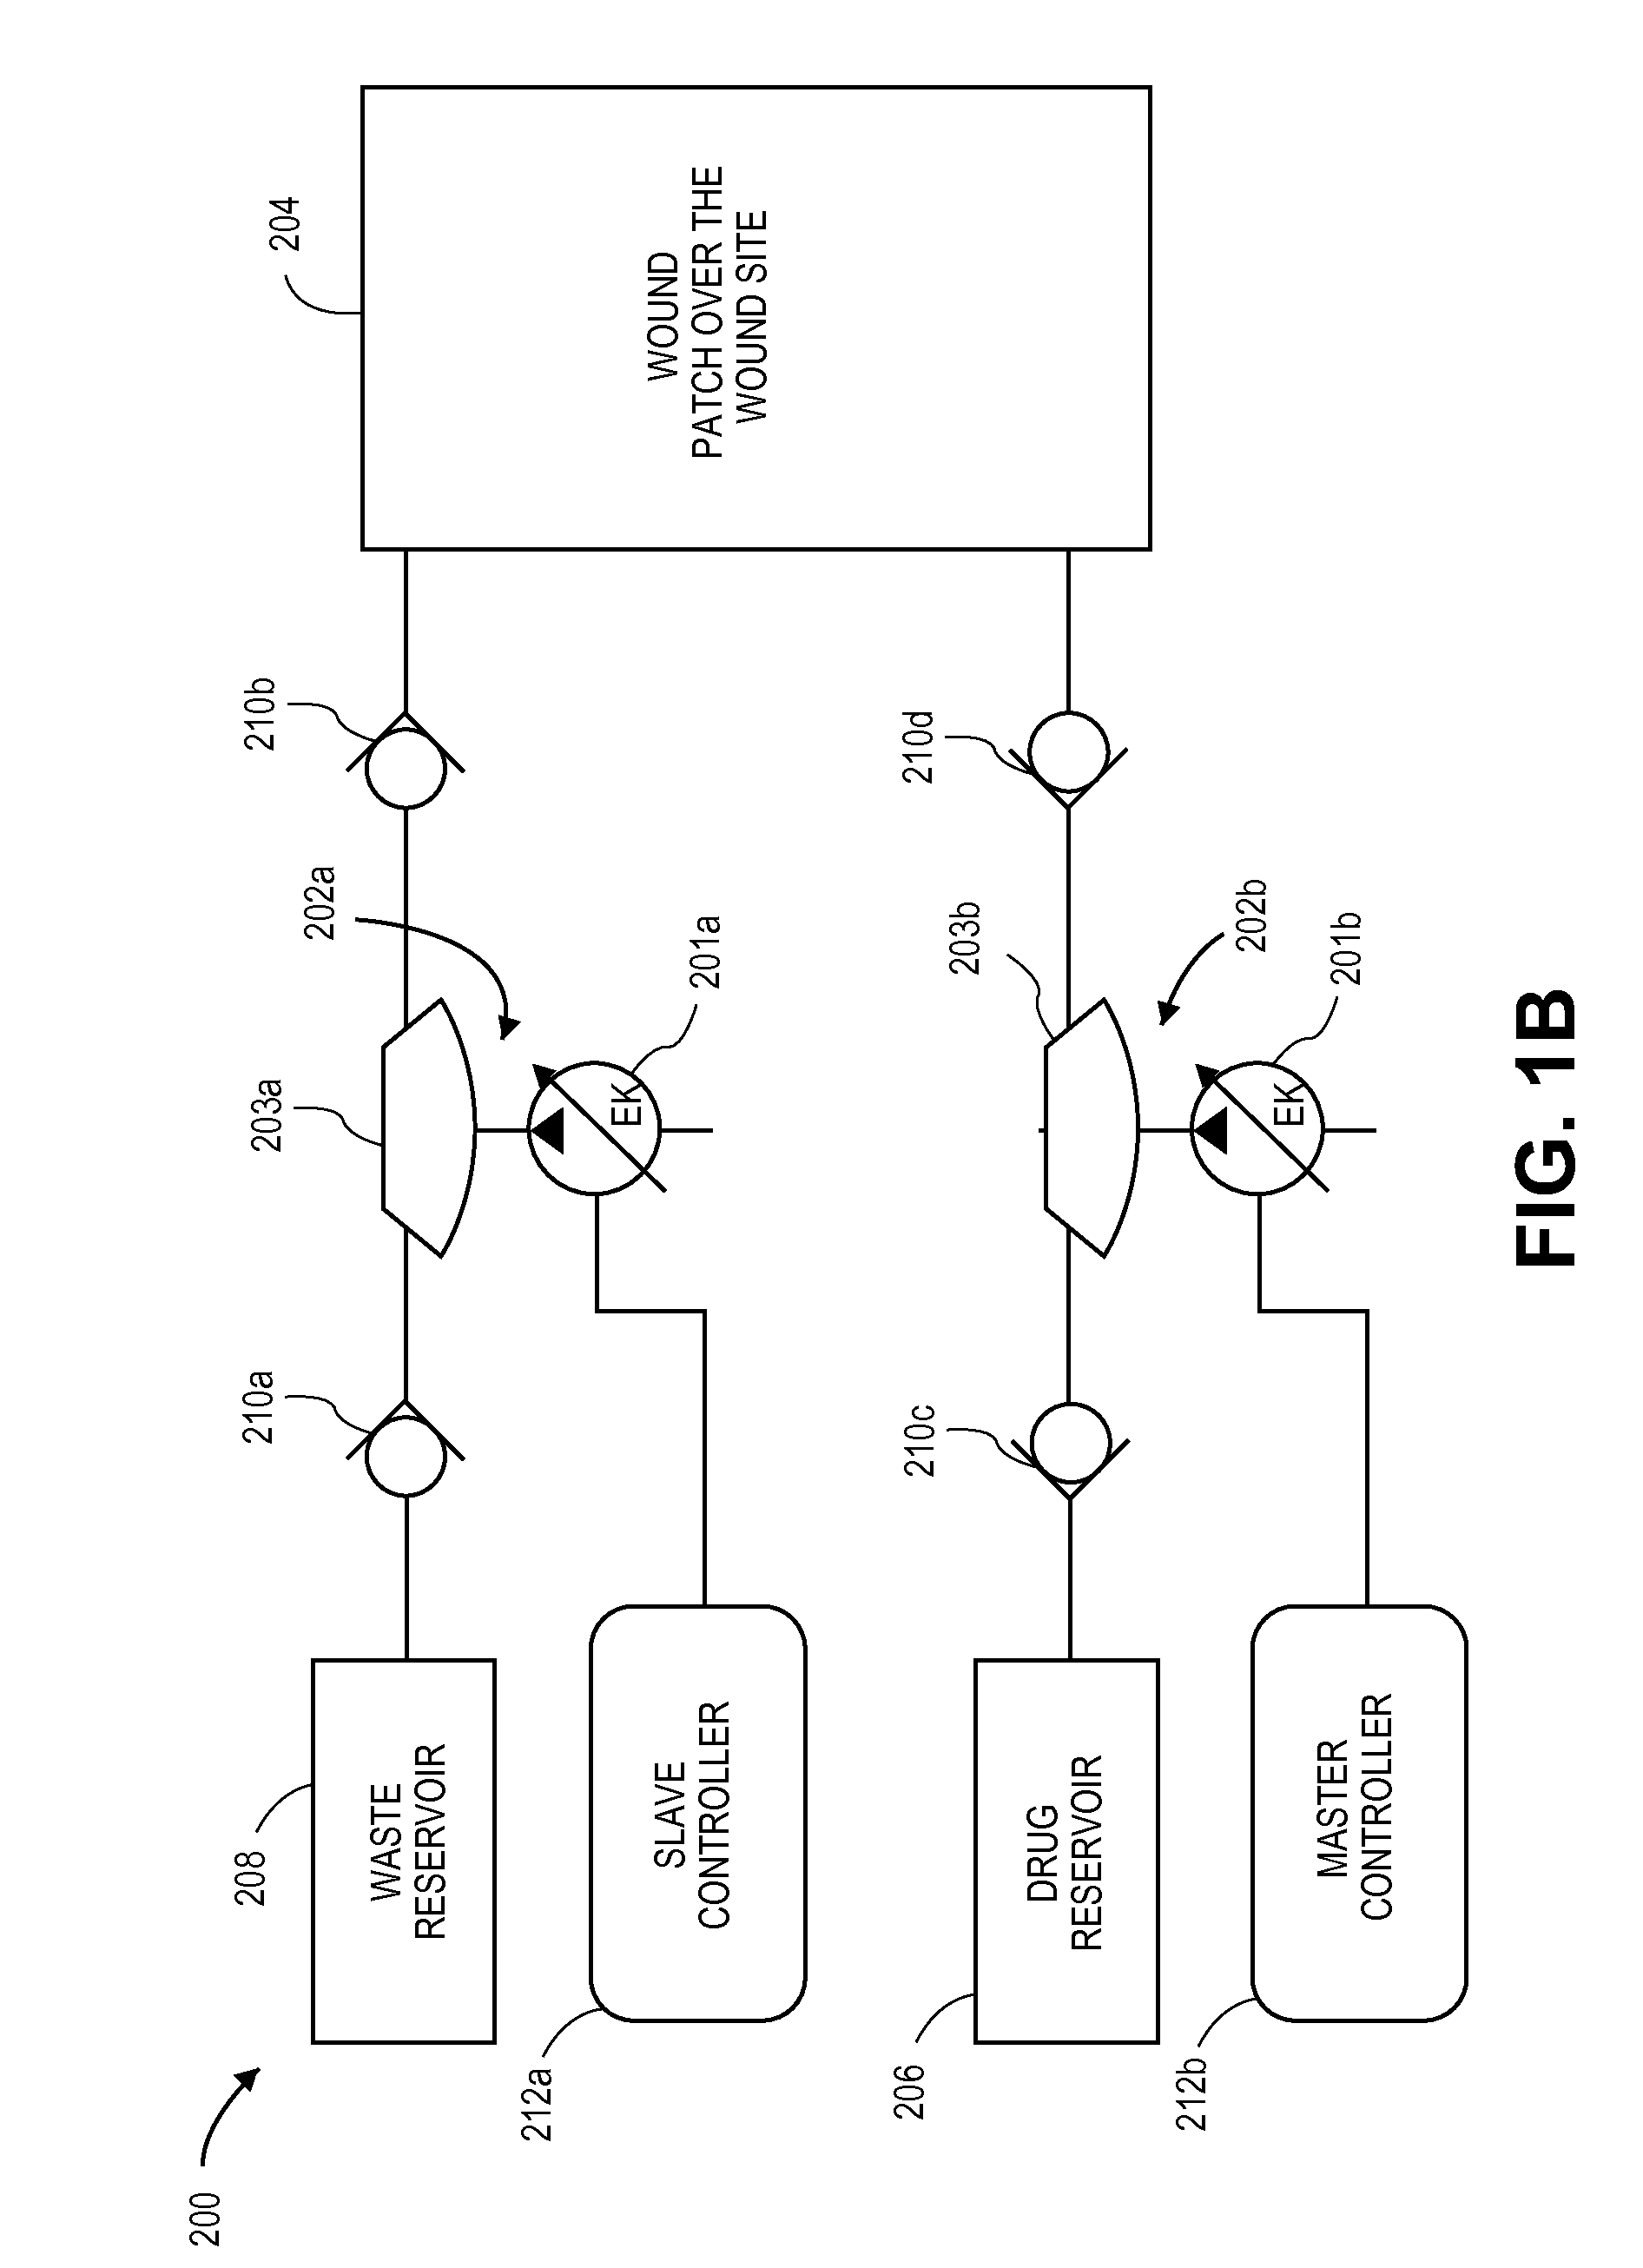 Electrokinetic pump based wound treatment system and methods